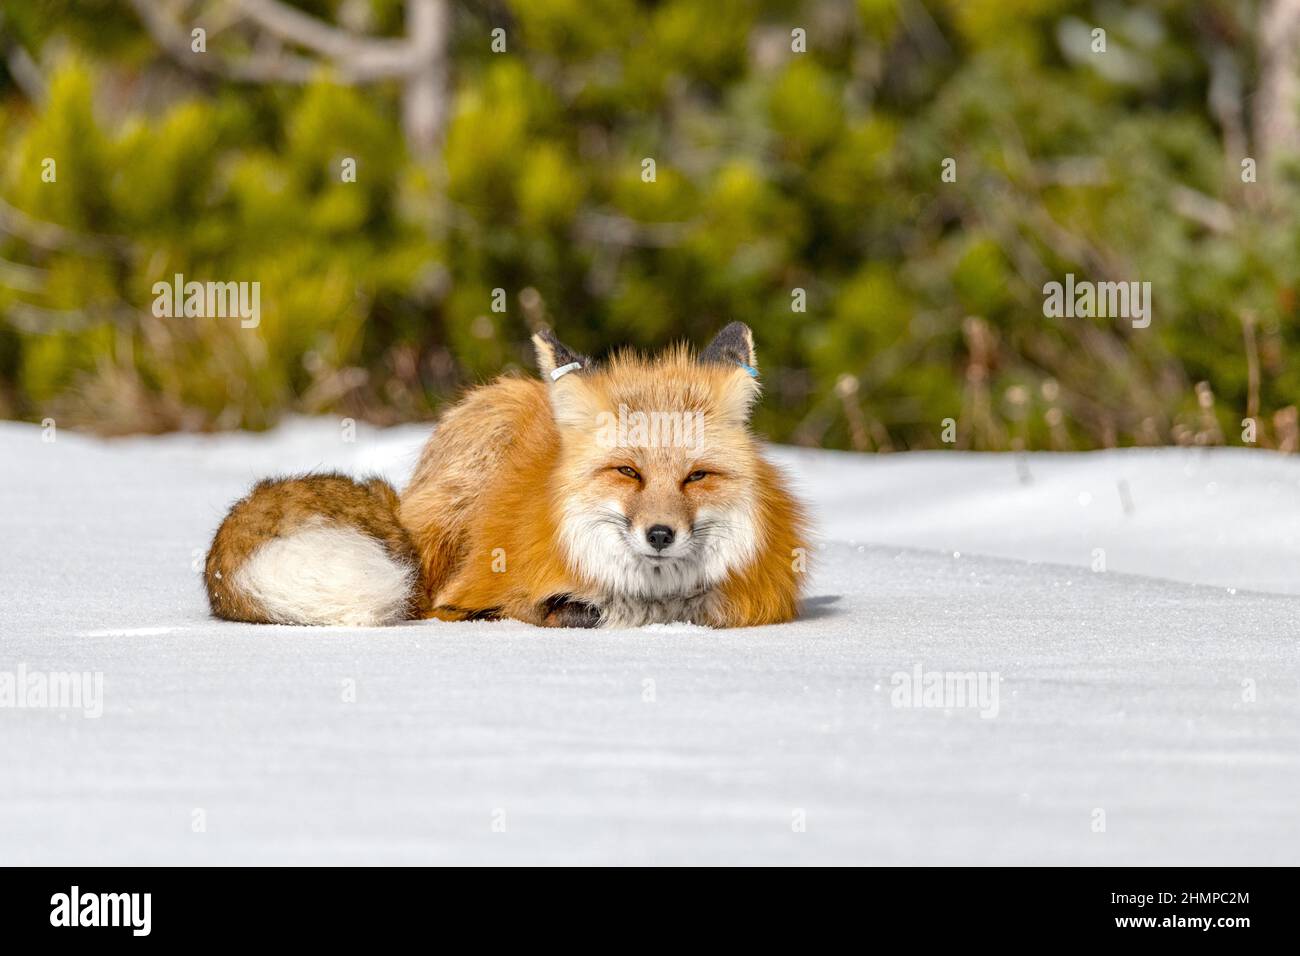 Wildlife Animals in Grand Teton national park, YellowStone national park with mountain and snow background Stock Photo